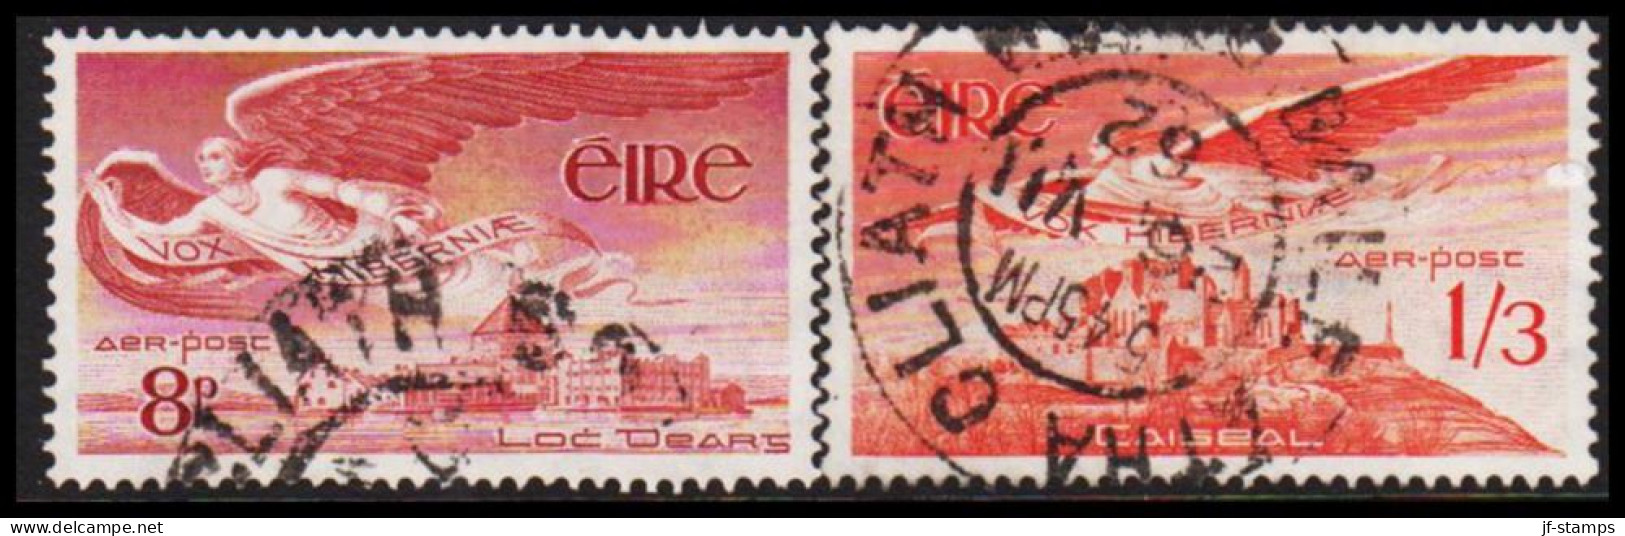 1954. EIRE. VOX HIBERNIÆ AER-POST AIR MAIL Complete Set. (Michel 124-125) - JF544529 - Used Stamps